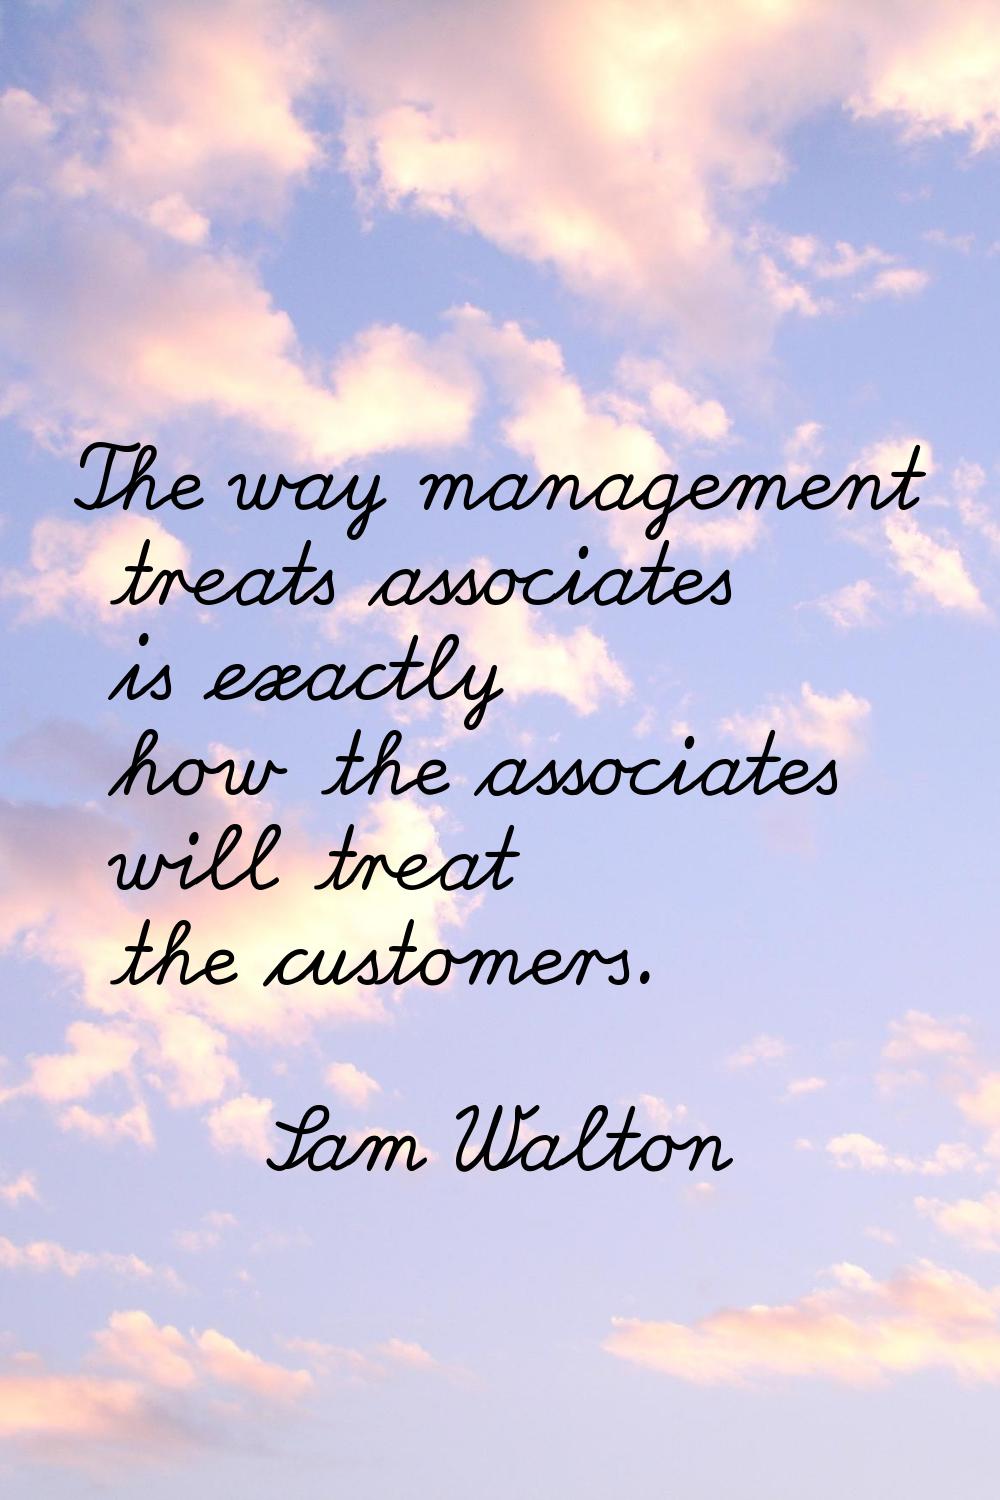 The way management treats associates is exactly how the associates will treat the customers.